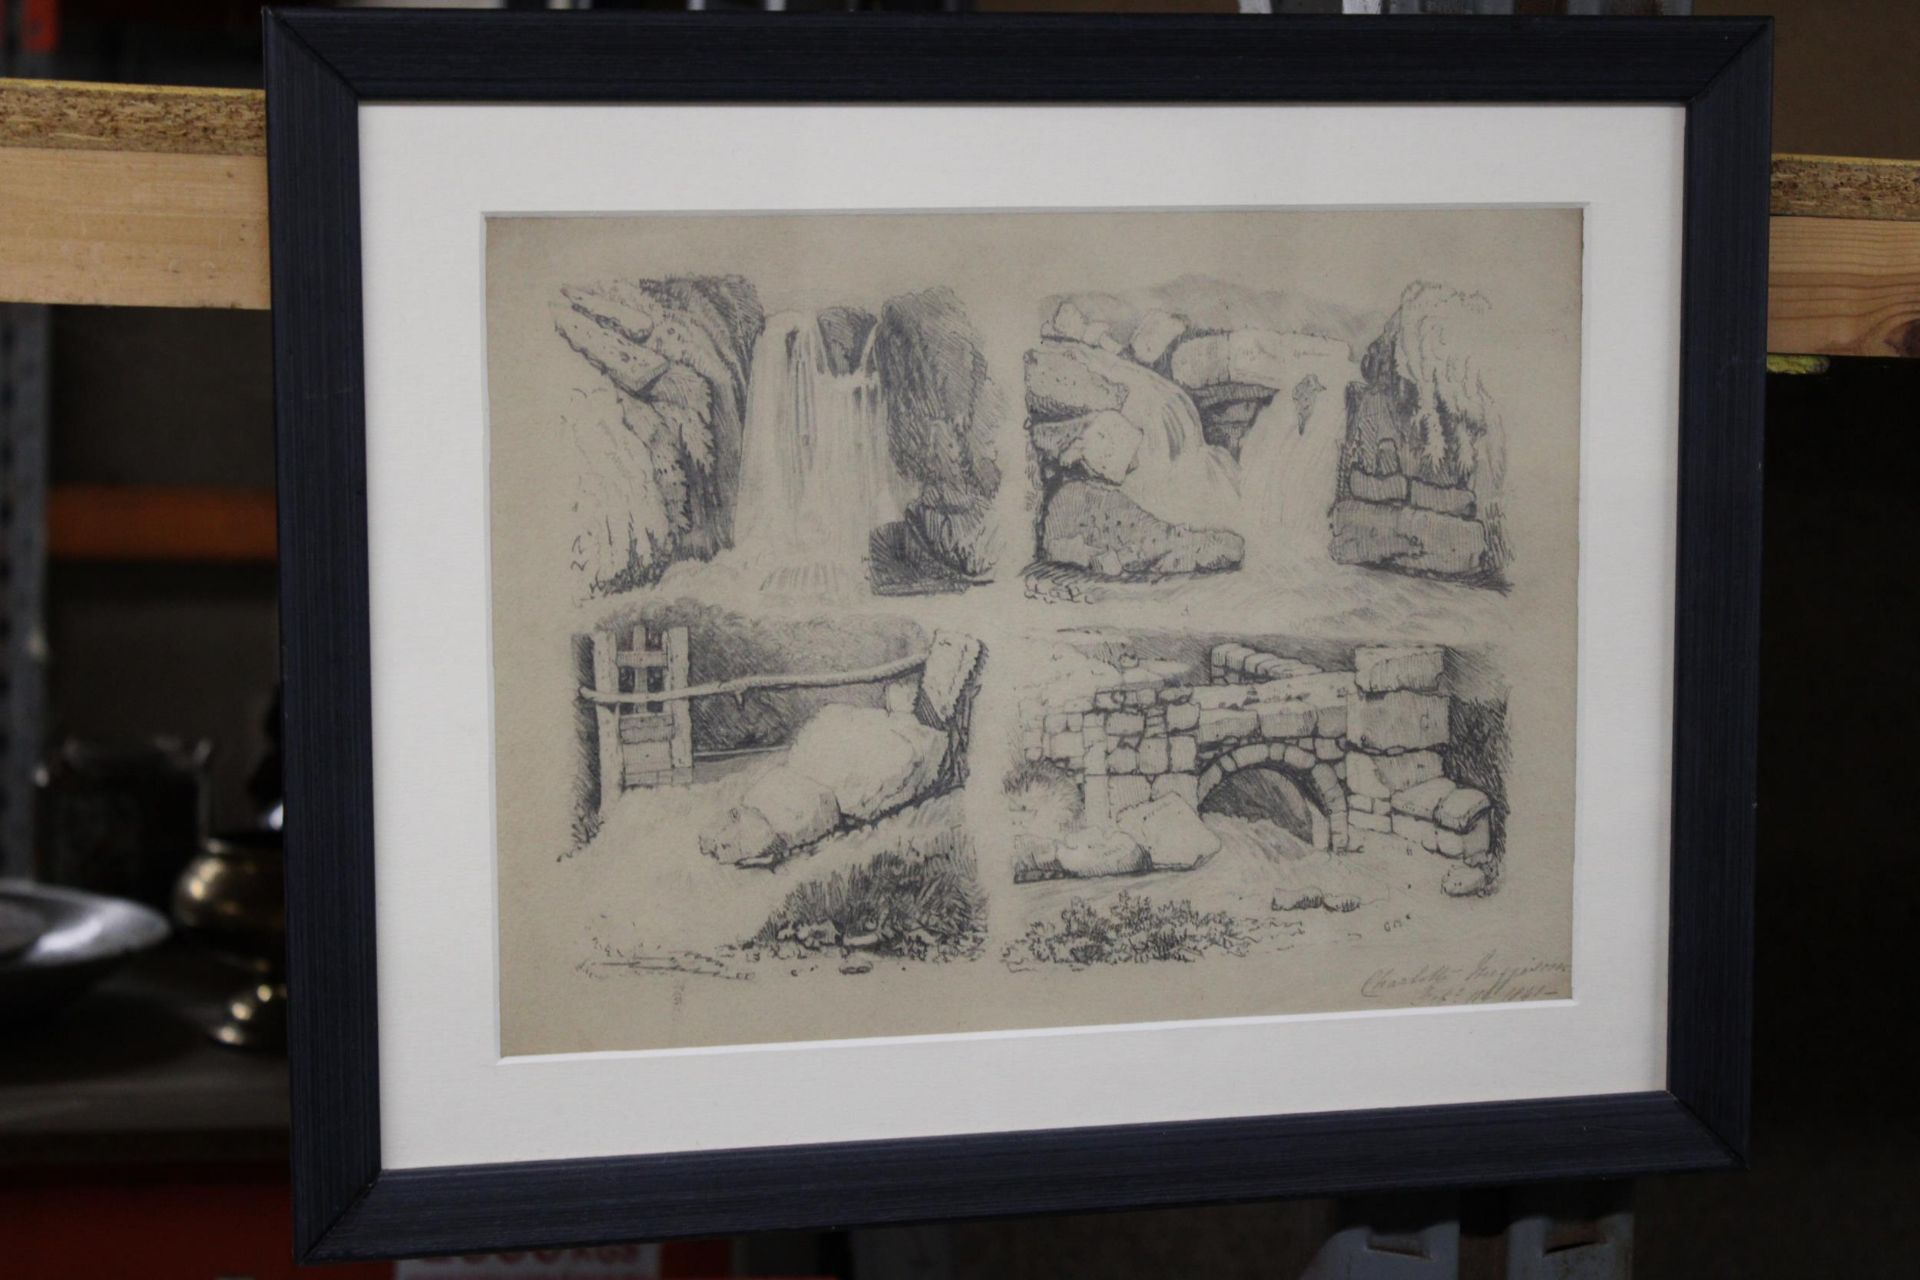 SIX "OVER PENCILED" PRINTS FEATURING SEA SCENES, DOORS, WATERFALLS, STEPS, CHURCHES ETC - Image 3 of 3